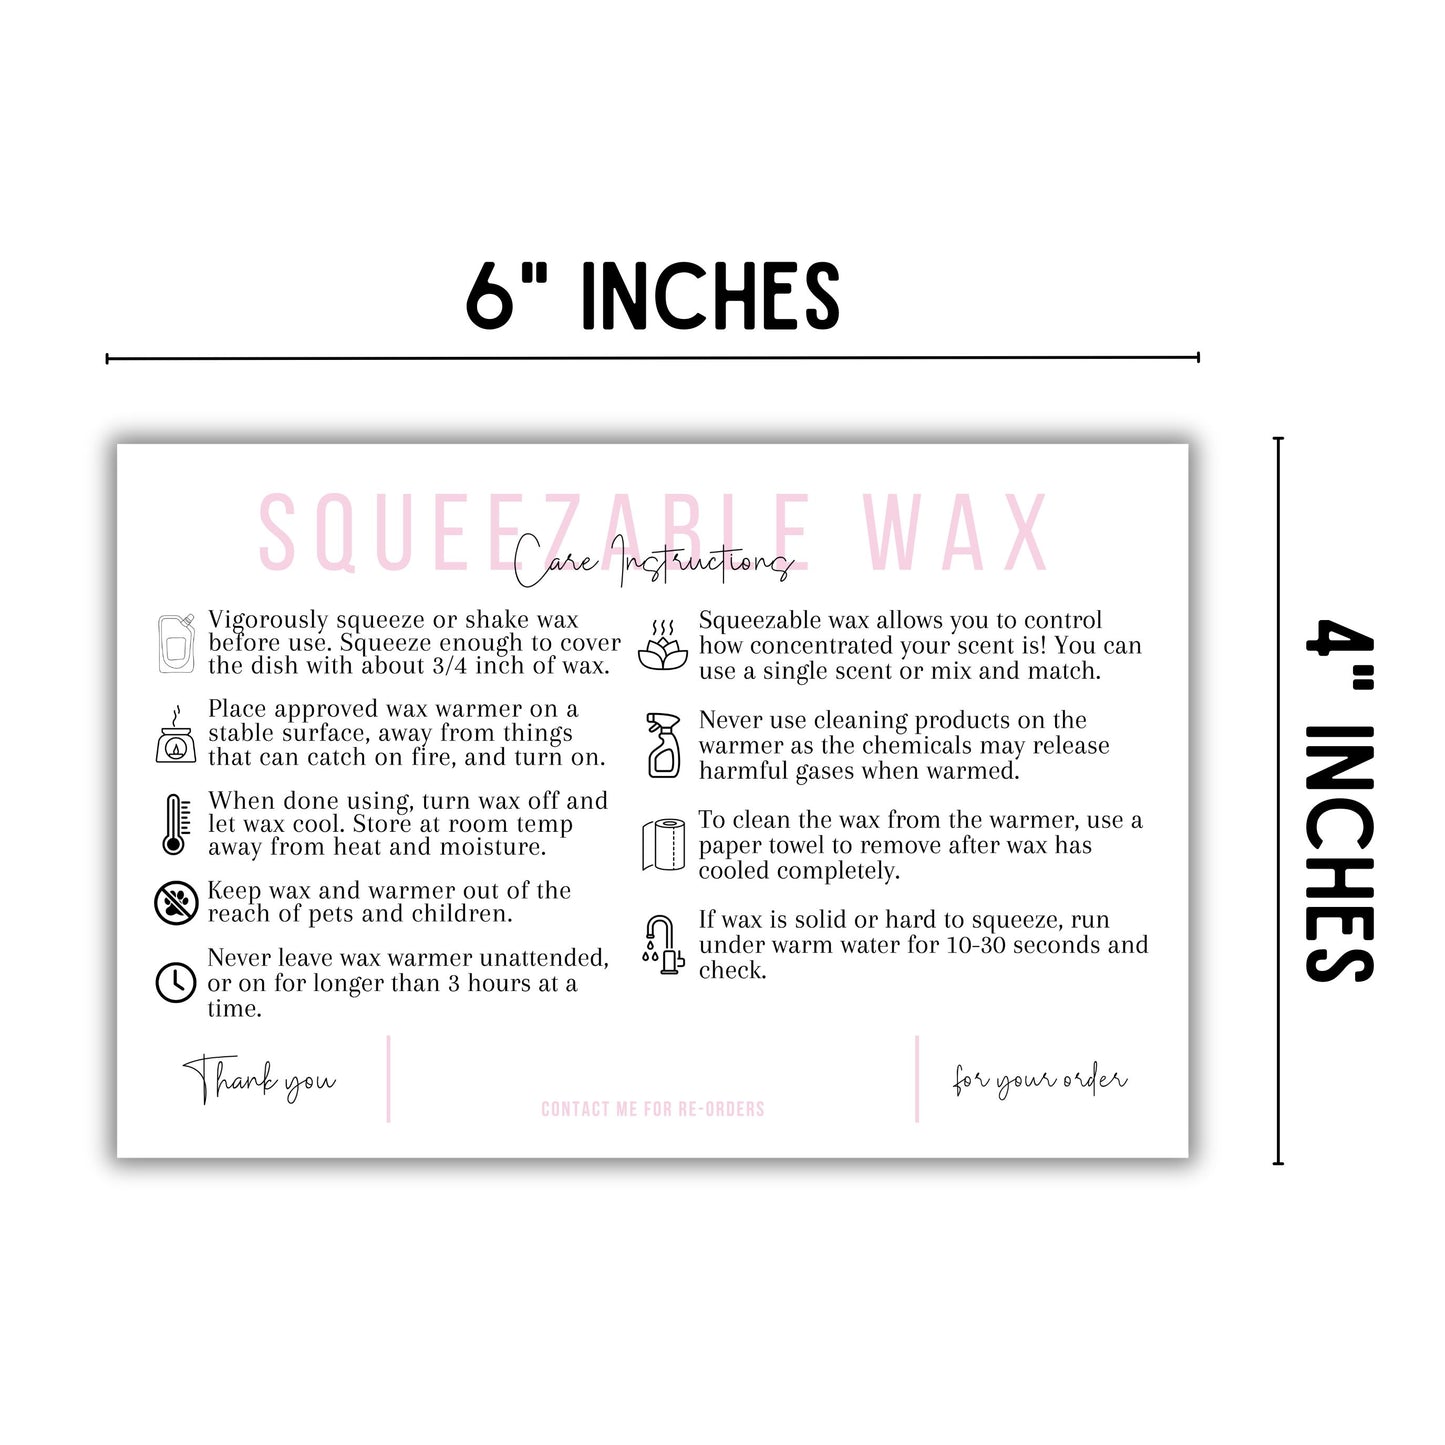 Squeezy Squeezable Wax Bottle Care Instruction Cards | 30 pk 4x6”